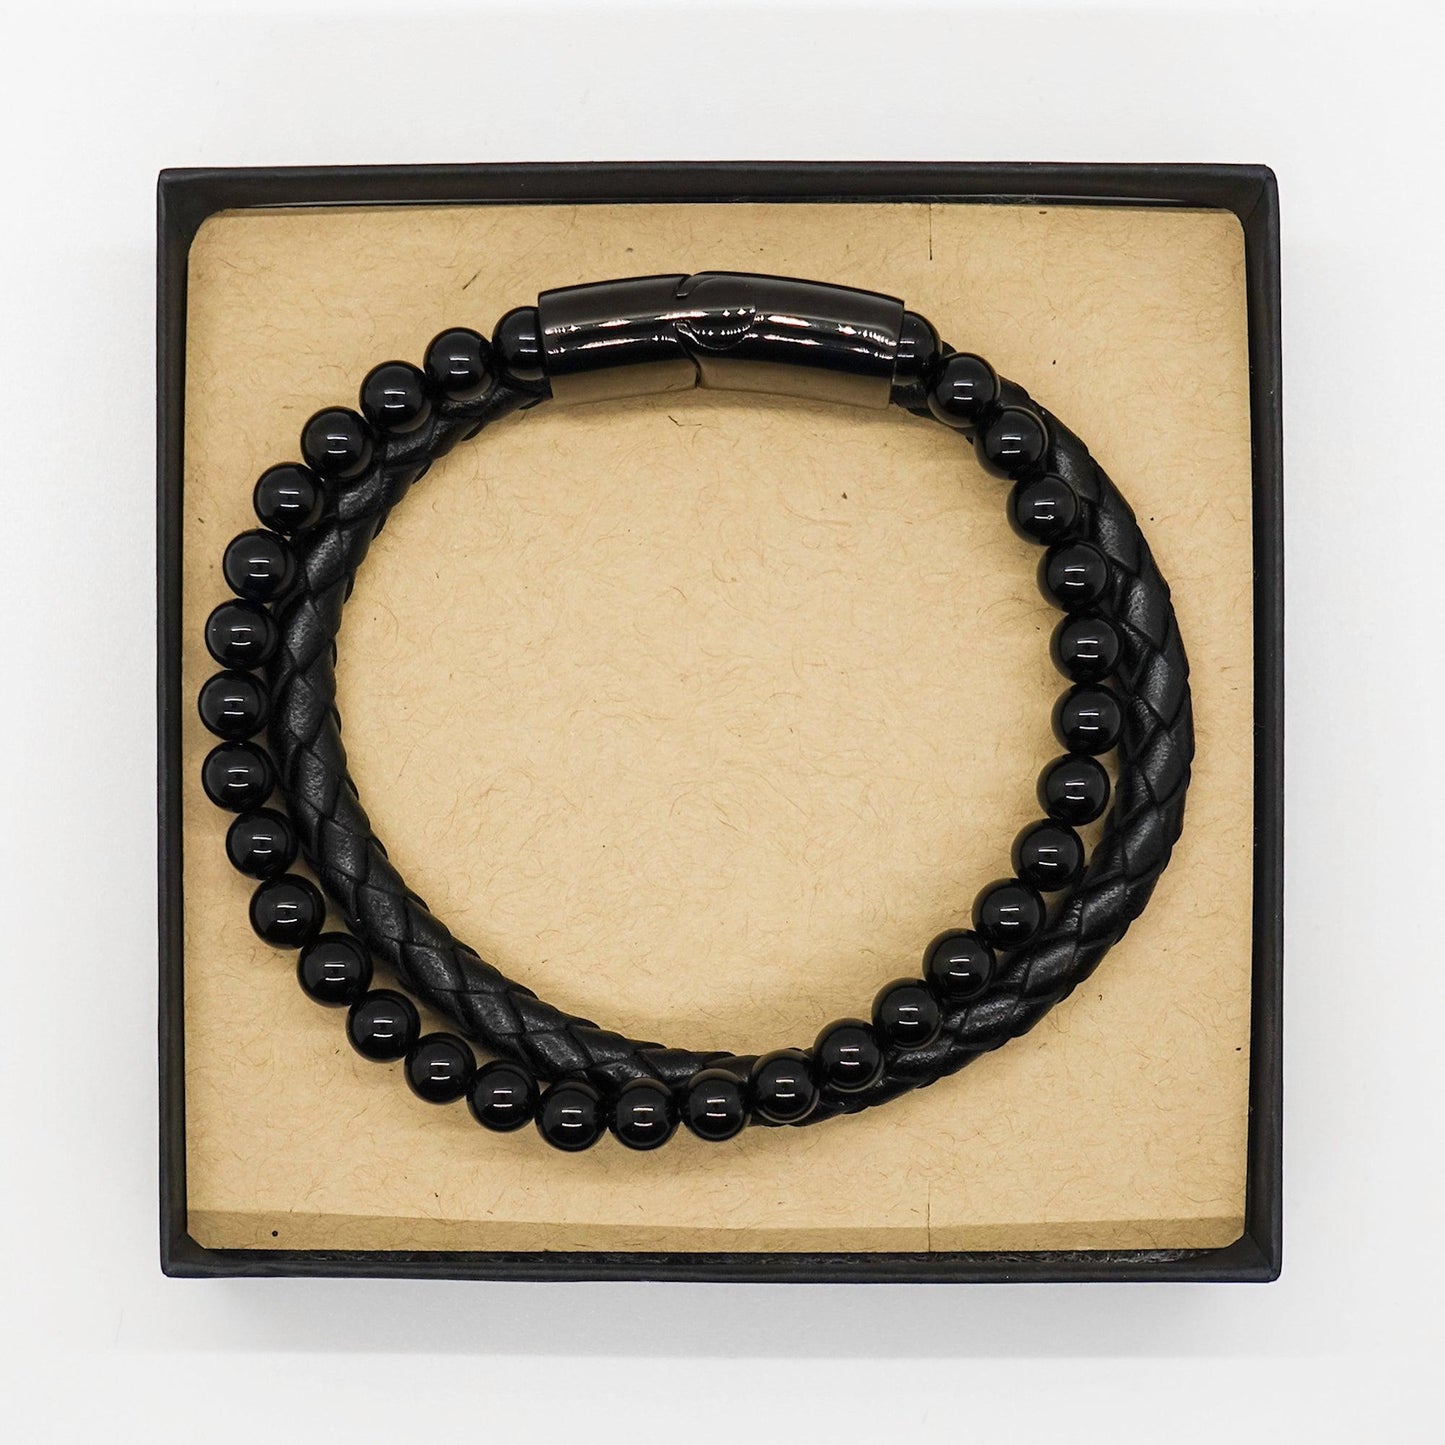 Office Clerk Black Braided Leather Stone Bracelet - Thanks for being who you are - Birthday Christmas Jewelry Gifts Coworkers Colleague Boss - Mallard Moon Gift Shop